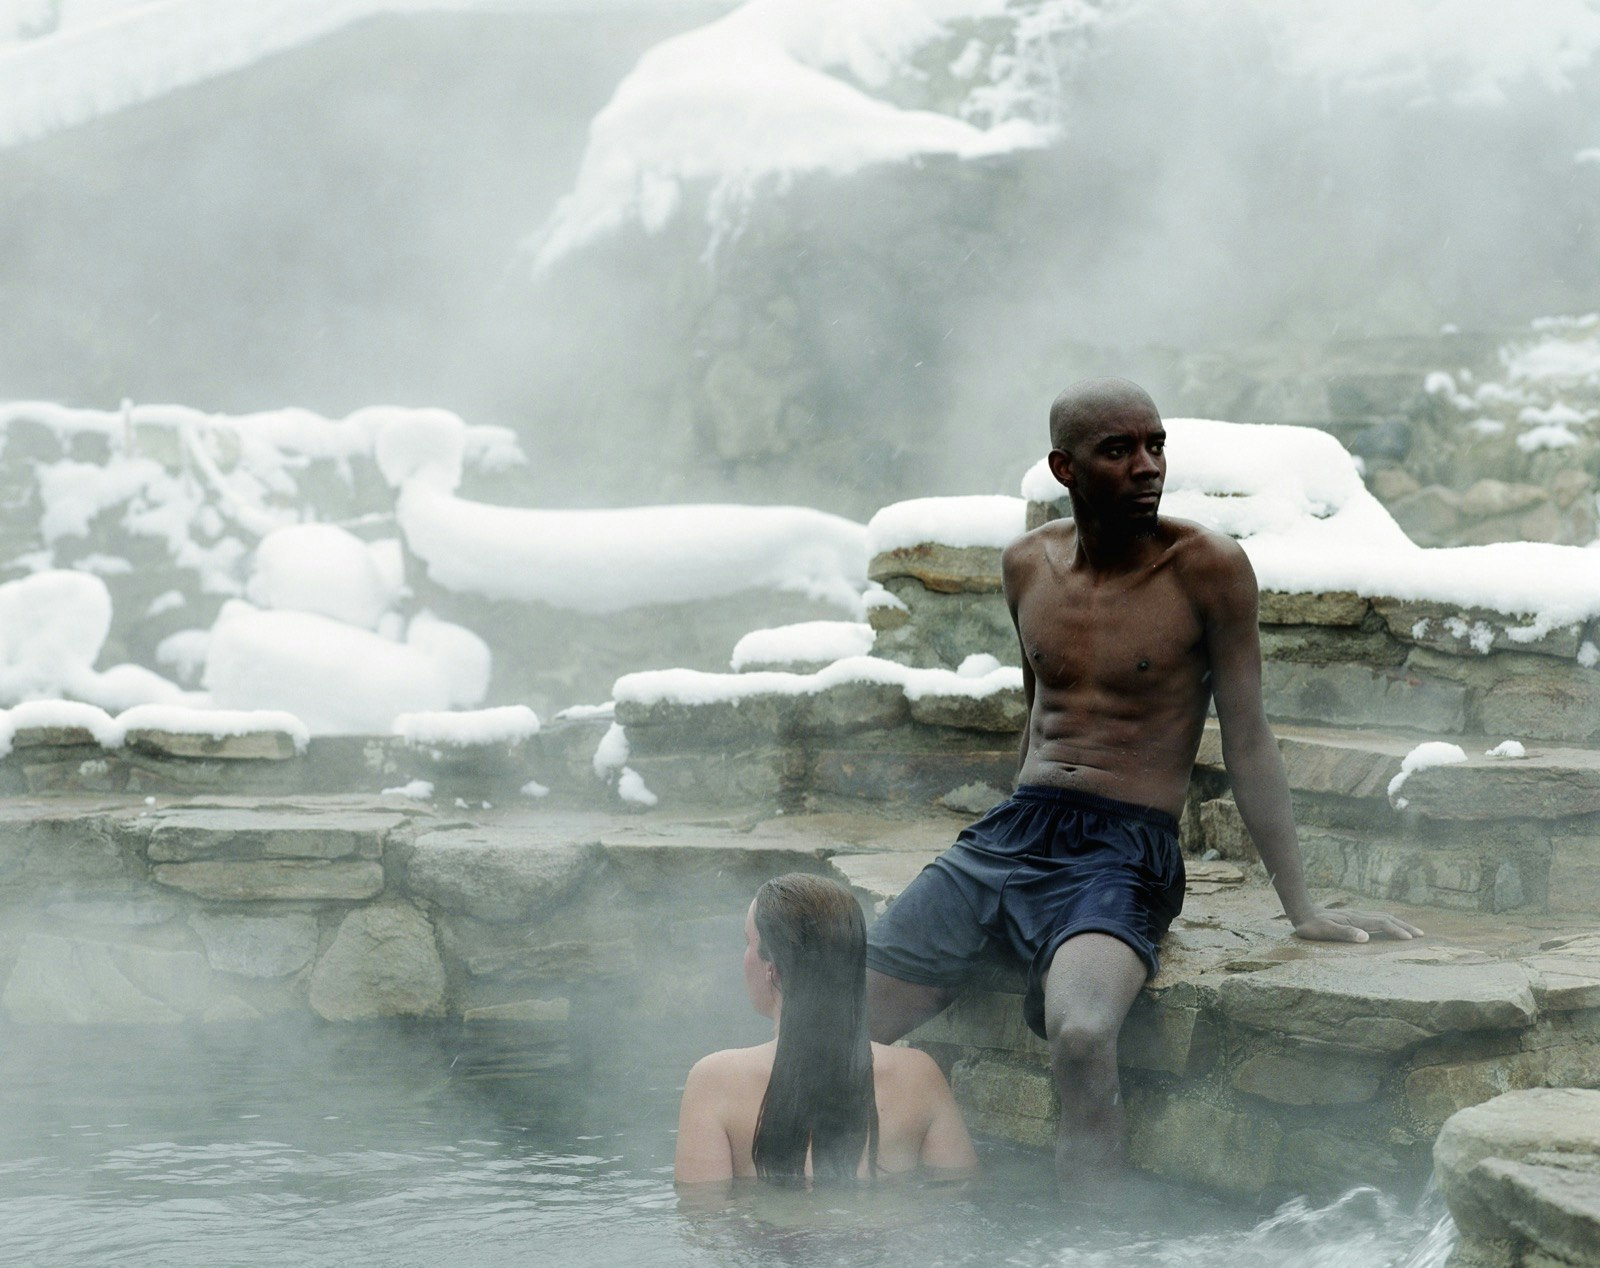 A man and a woman soak in a hot spring in Steamboat, Colorado